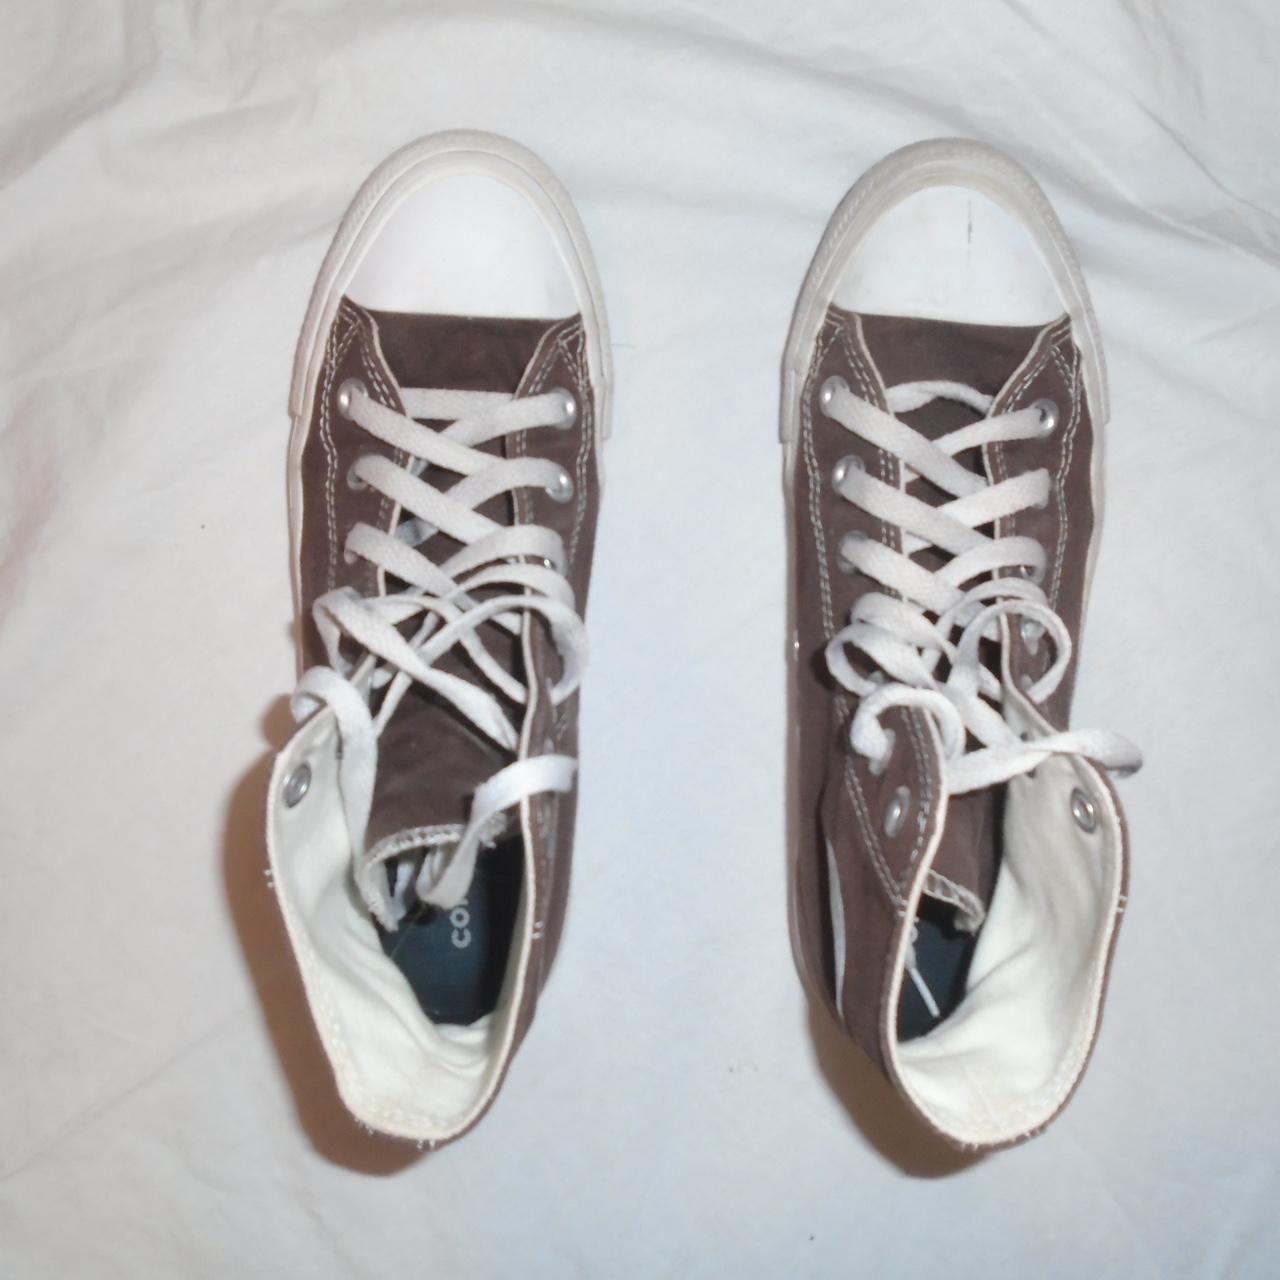 Converse Women's Brown Trainers (5)